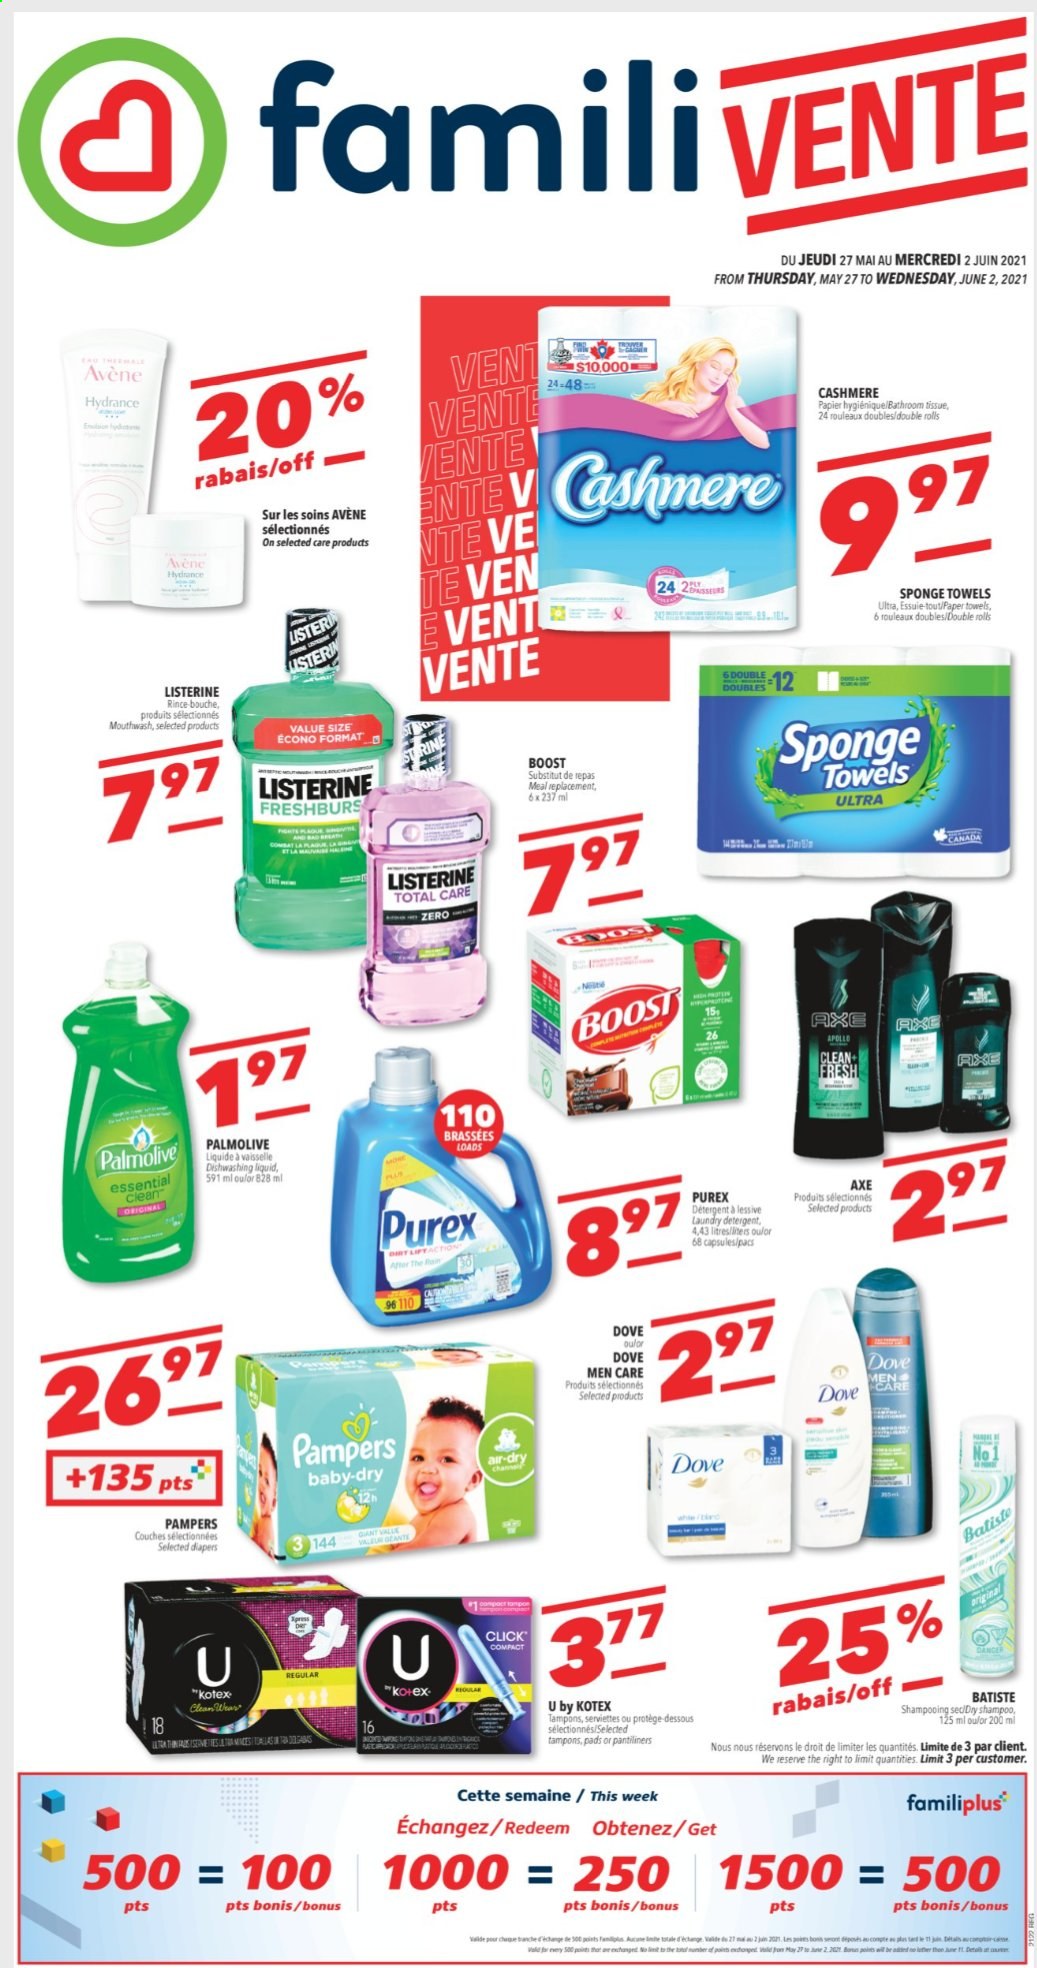 thumbnail - Familiprix Flyer - May 27, 2021 - June 02, 2021 - Sales products - Boost, nappies, tissues, kitchen towels, paper towels, laundry detergent, Purex, dishwashing liquid, Palmolive, mouthwash, pantiliners, Kotex, tampons, Listerine, shampoo, Pampers. Page 1.